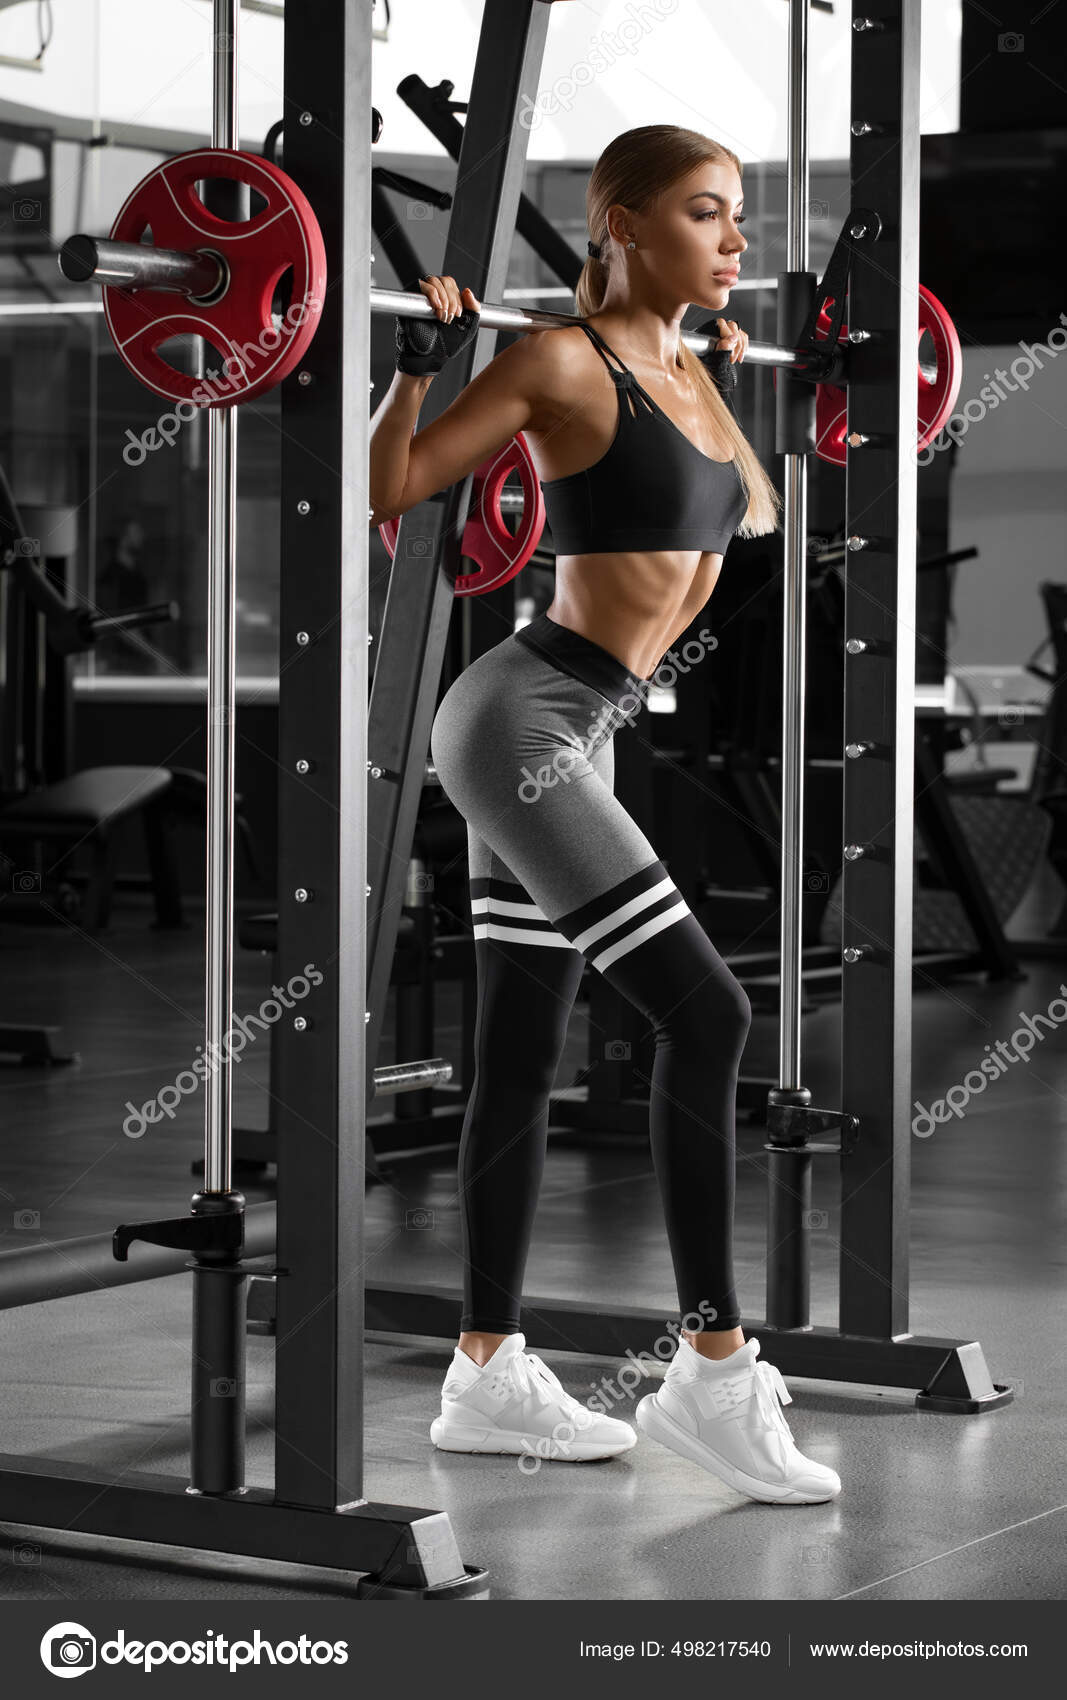 Athletic Girl Workout in Gym. Fitness Woman Doing Exercise for